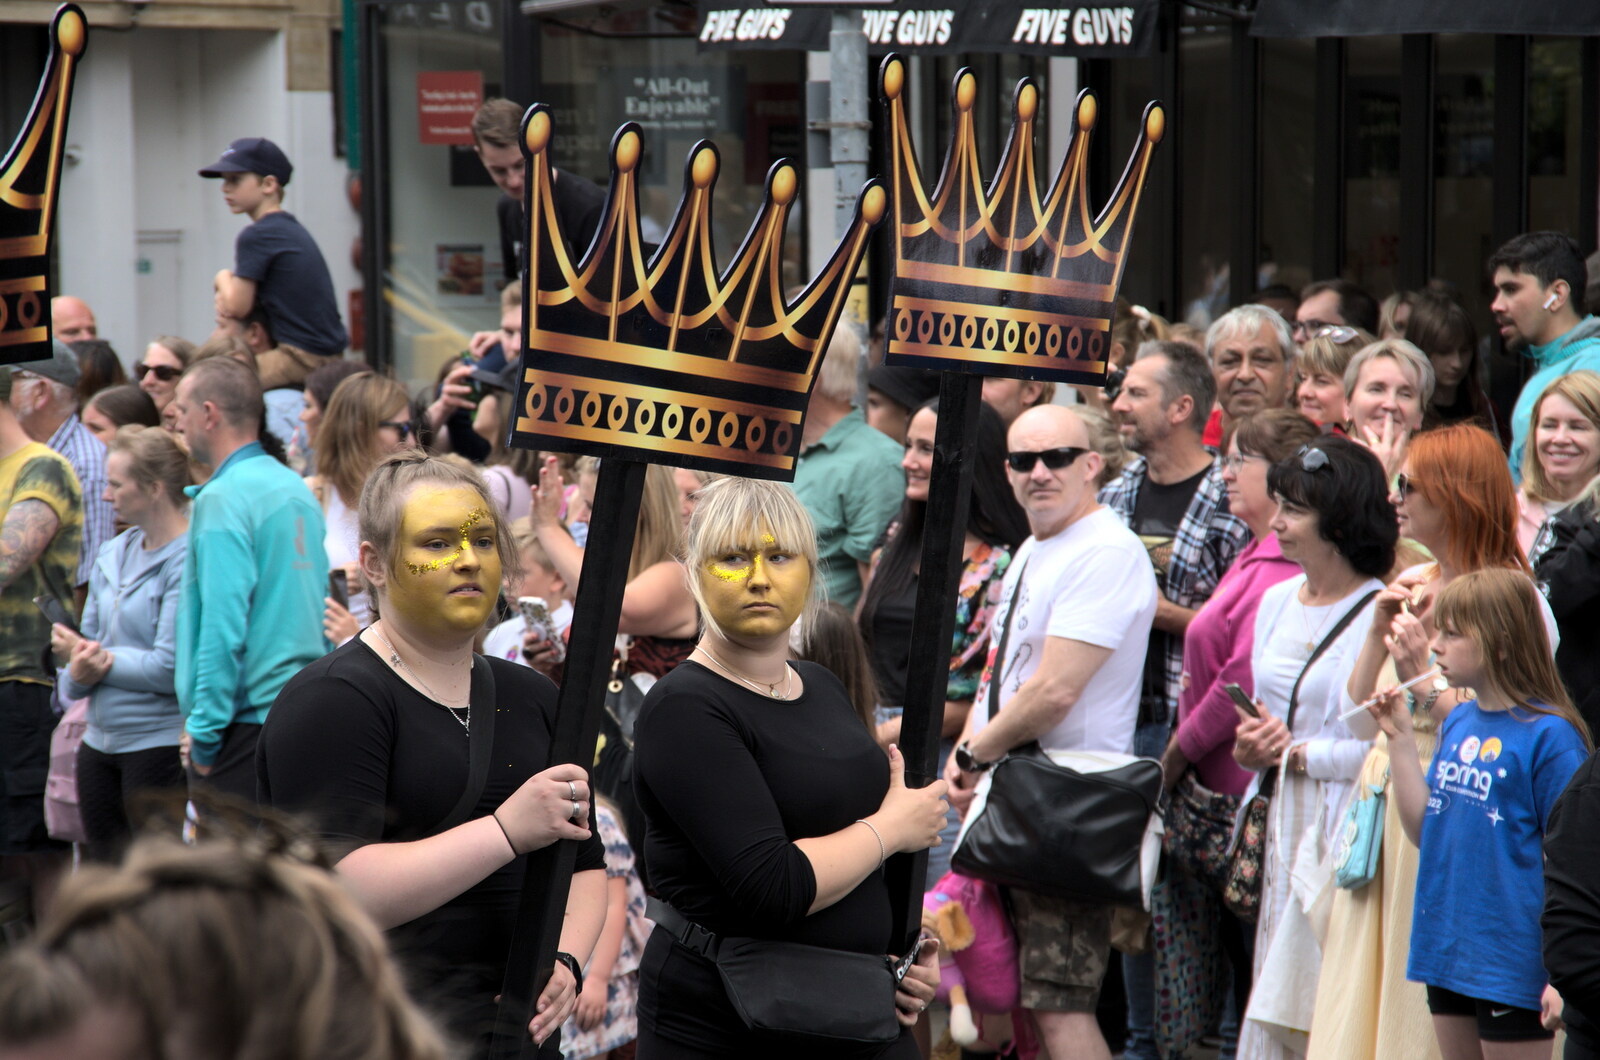 Gold faces and crowns from The Lord Mayor's Procession, Norwich, Norfolk - 2nd July 2022